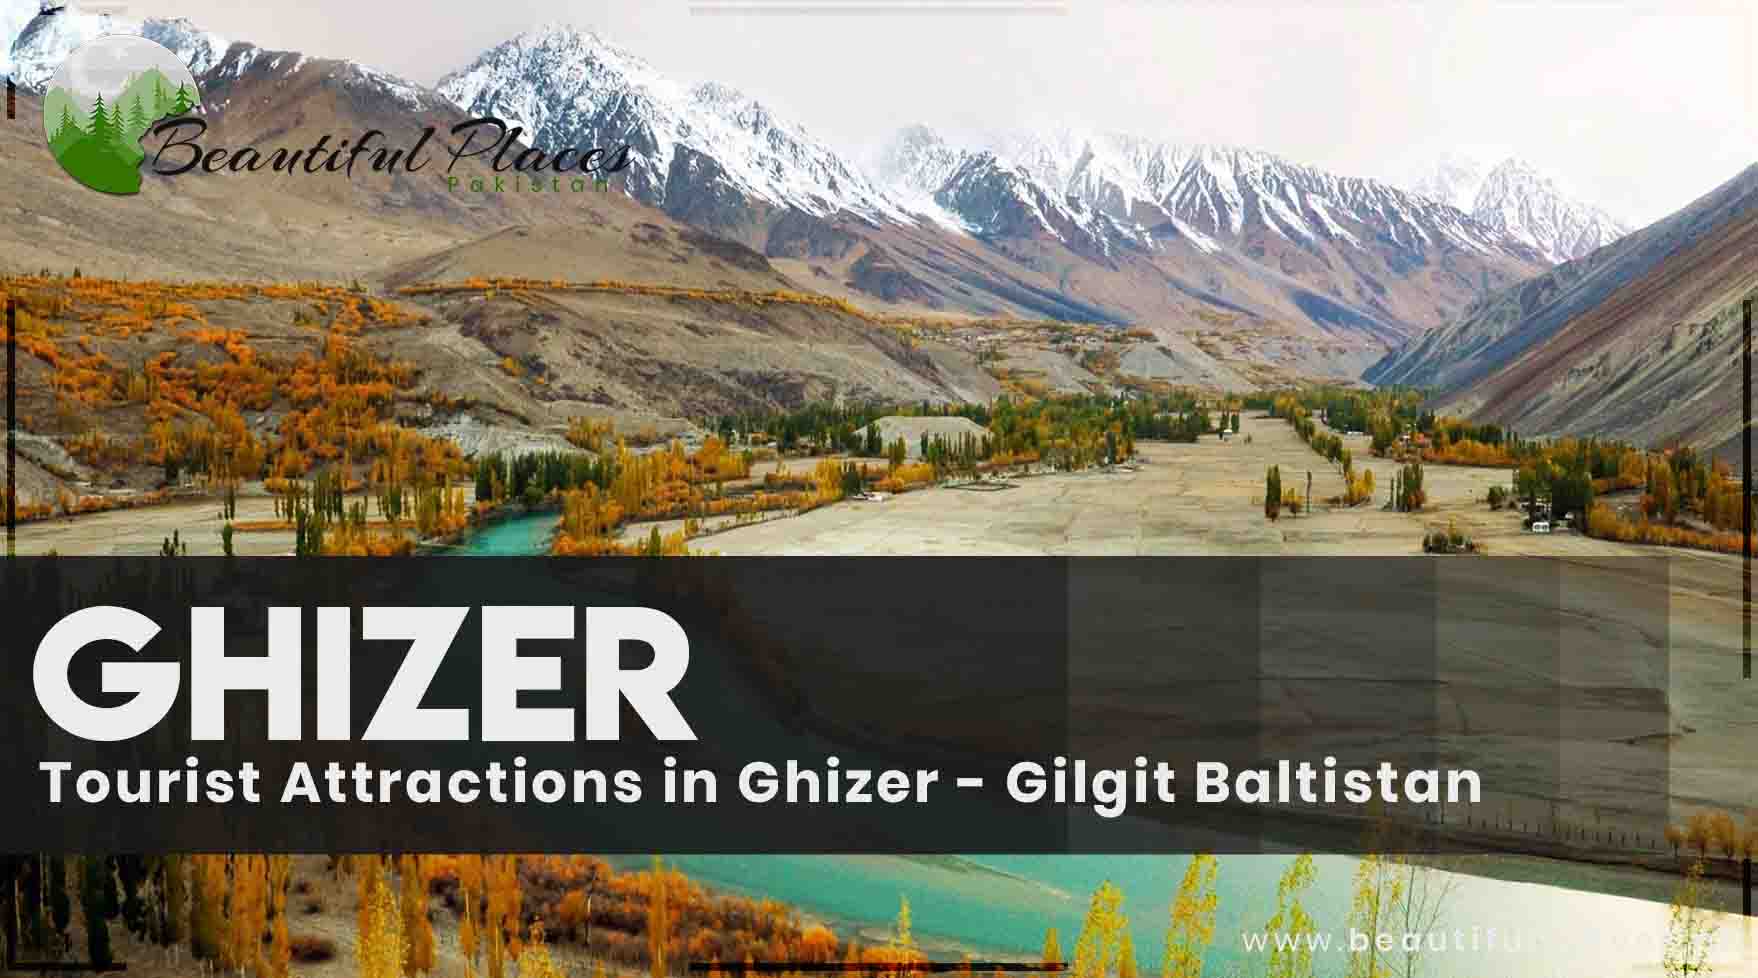 Tourist Attractions in Ghizer - Gilgit Baltistan